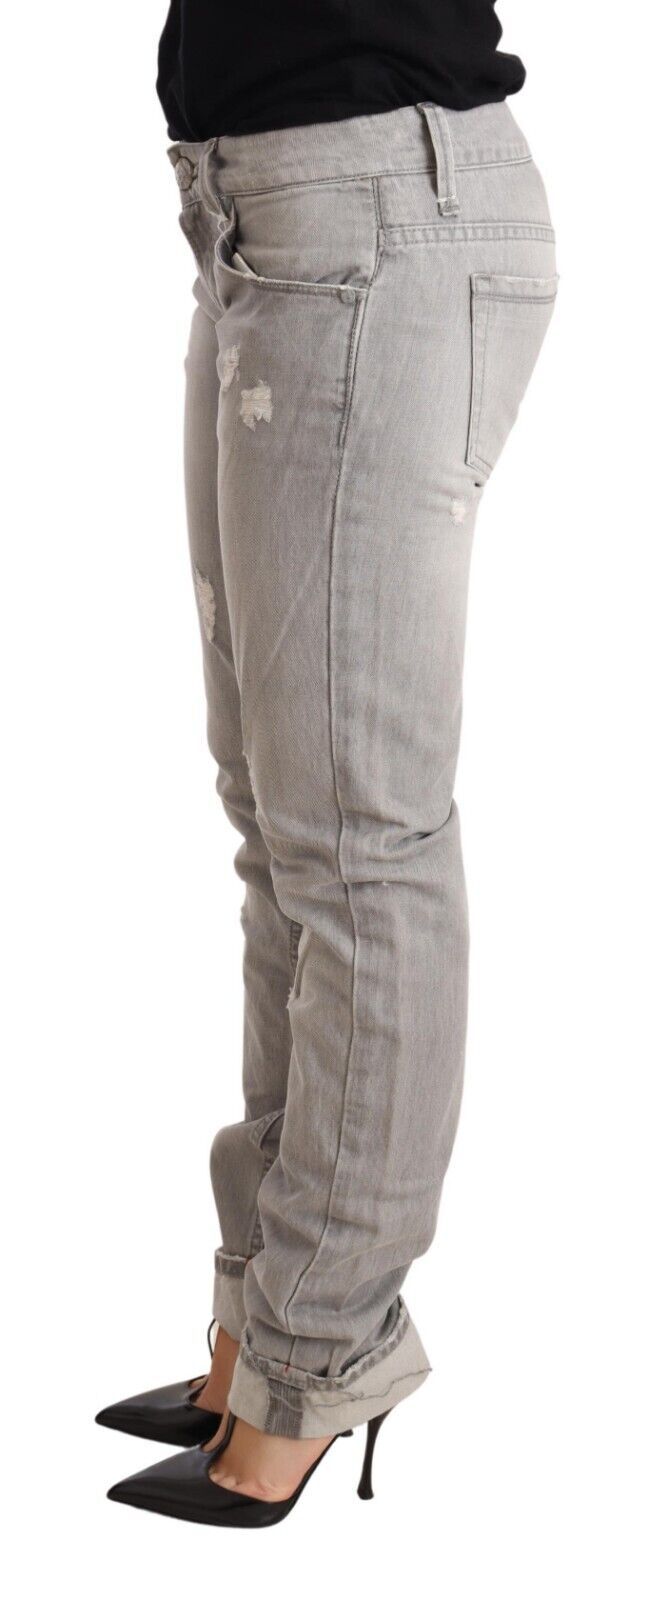 Acht Chic Slim Fit Tattered Gray Wash Jeans